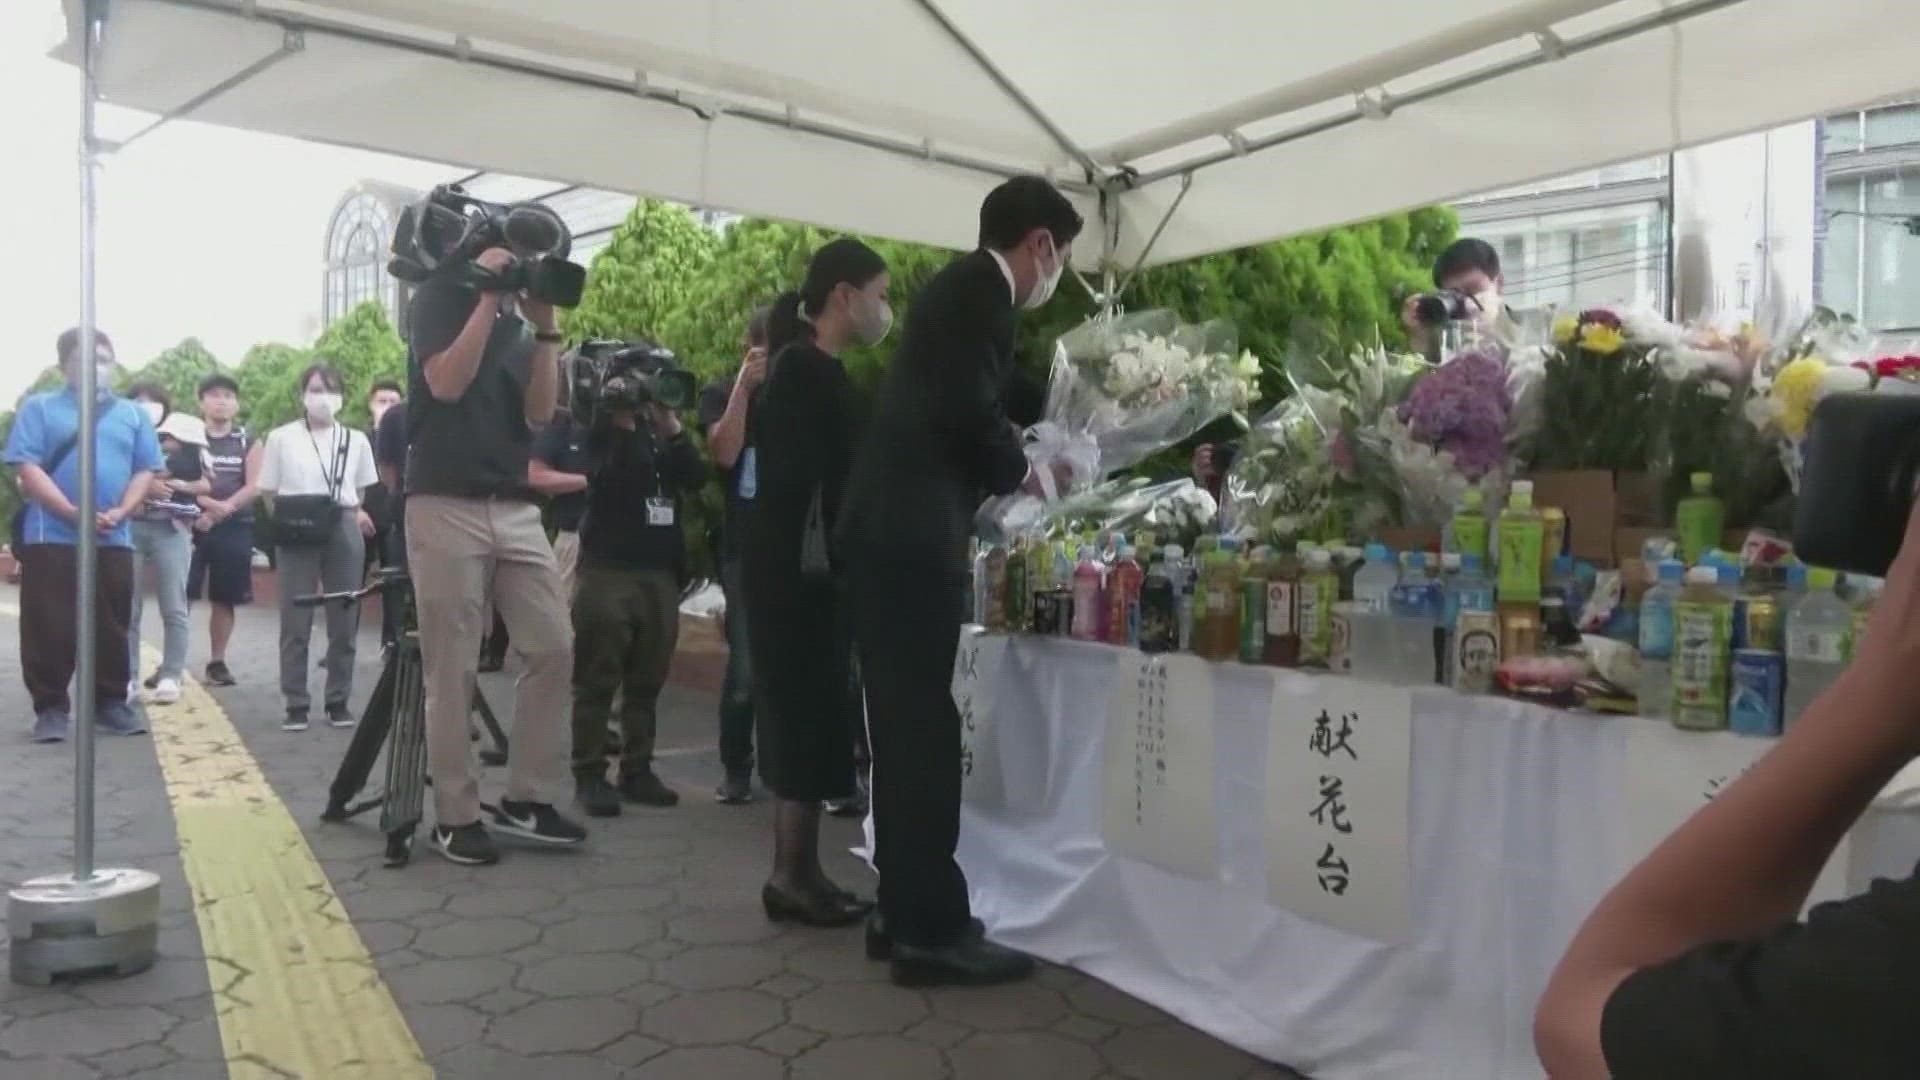 The body of Shinzo Abe arrived at his home on Saturday.